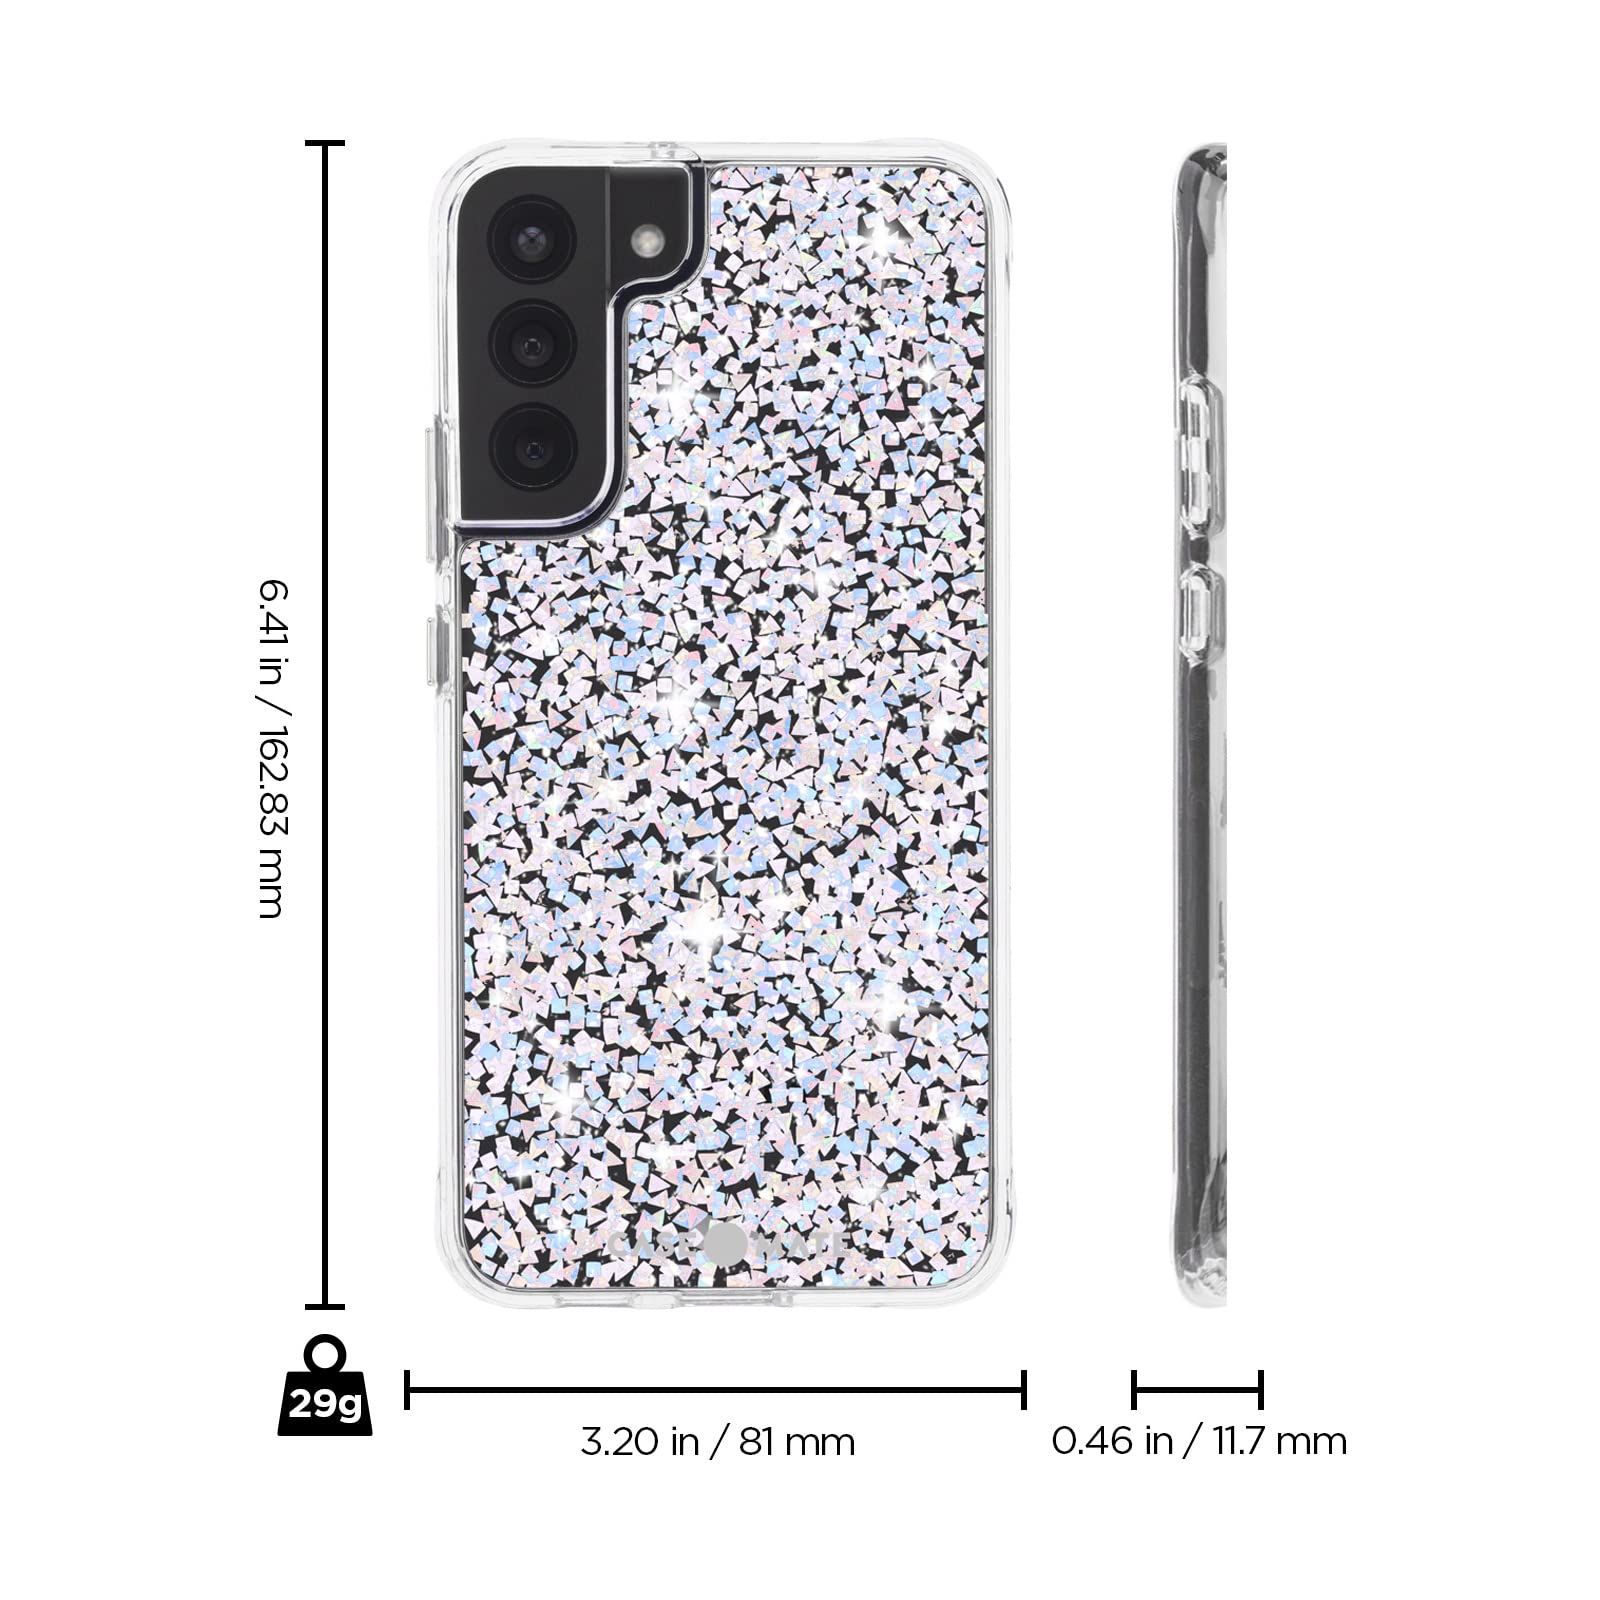 Case-Mate Samsung Galaxy S22 Plus Case - 6.6' Twinkle Diamond - 10ft Drop Protection with Wireless Charging - Luxury Bling Glitter for S22 Plus 5G - Anti Scratch, Shock Absorbing Materials, Slim Fit